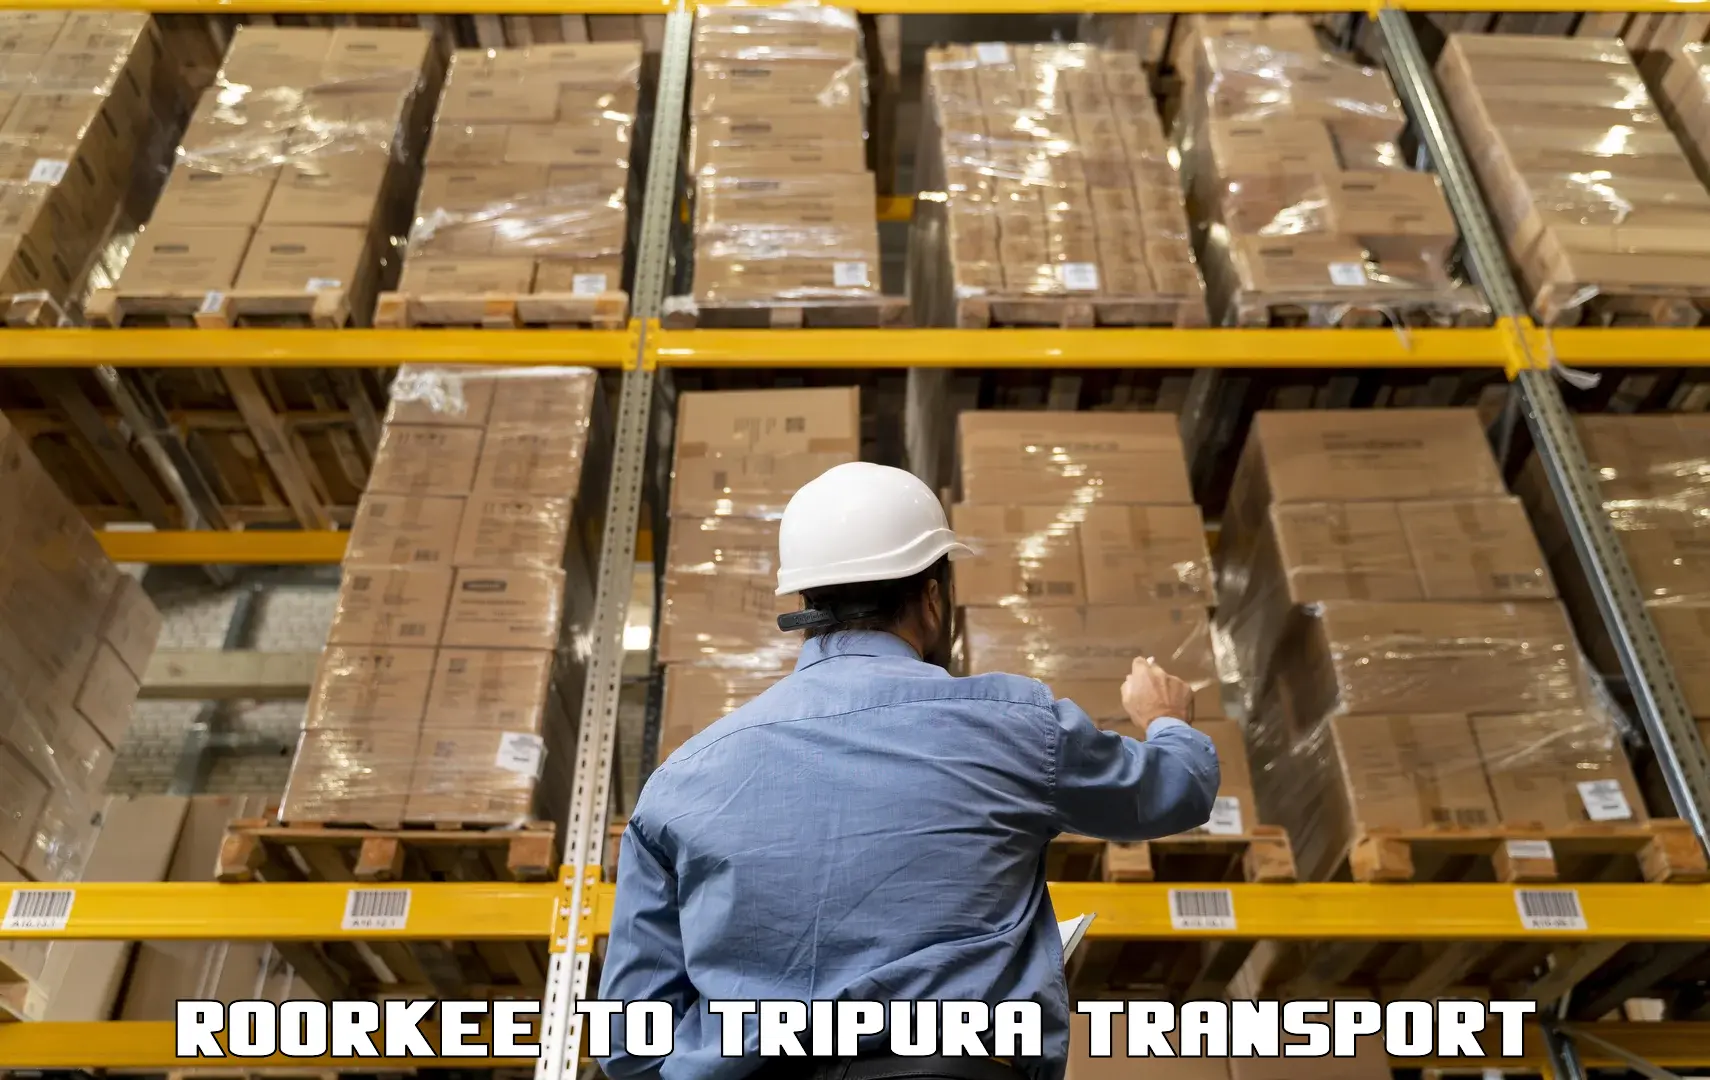 Commercial transport service Roorkee to Udaipur Tripura